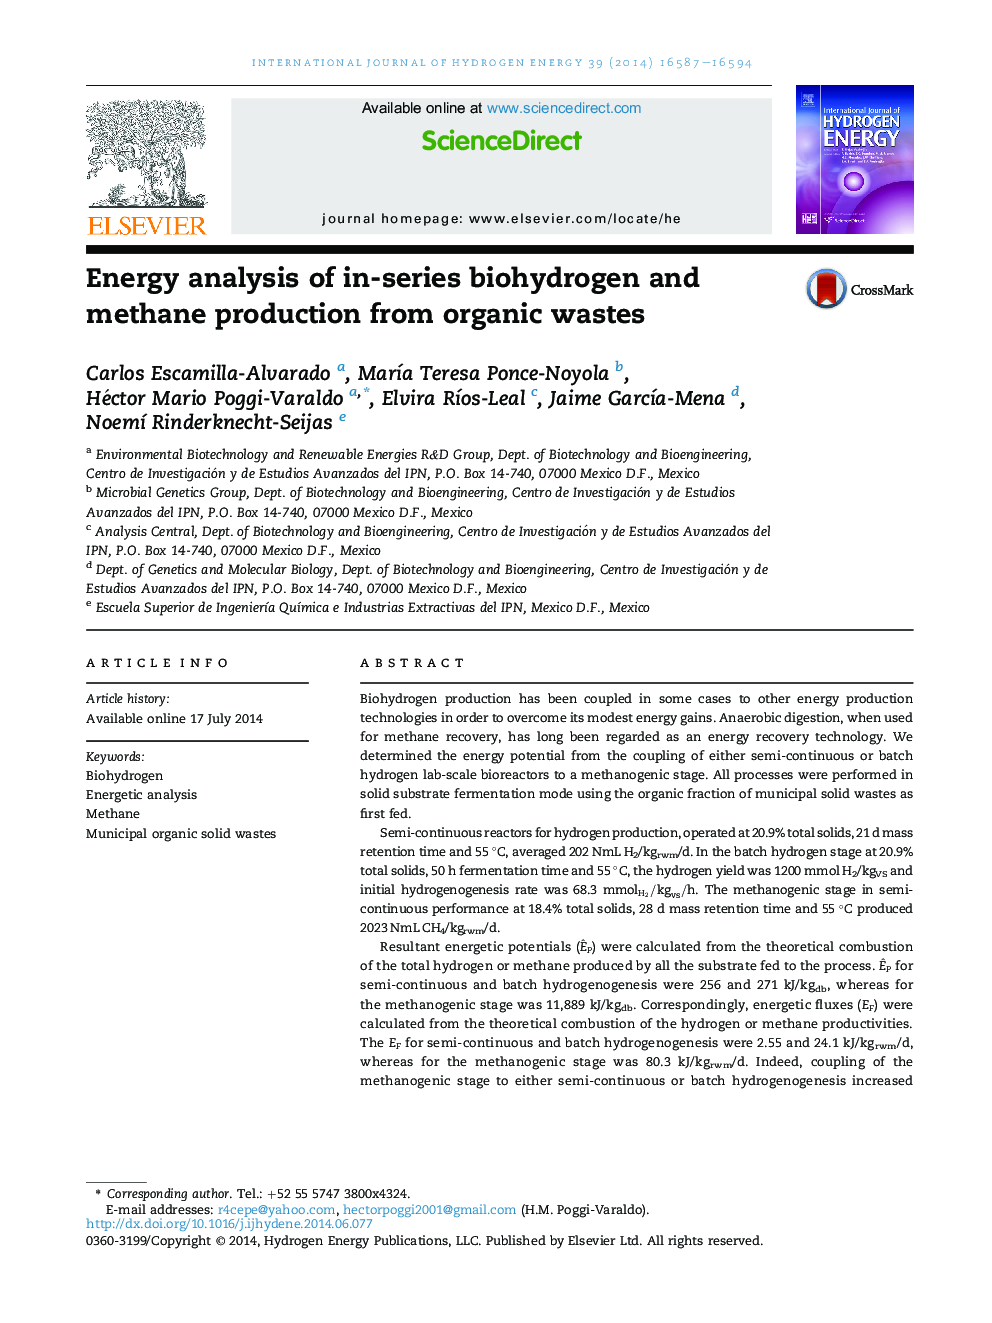 Energy analysis of in-series biohydrogen and methane production from organic wastes